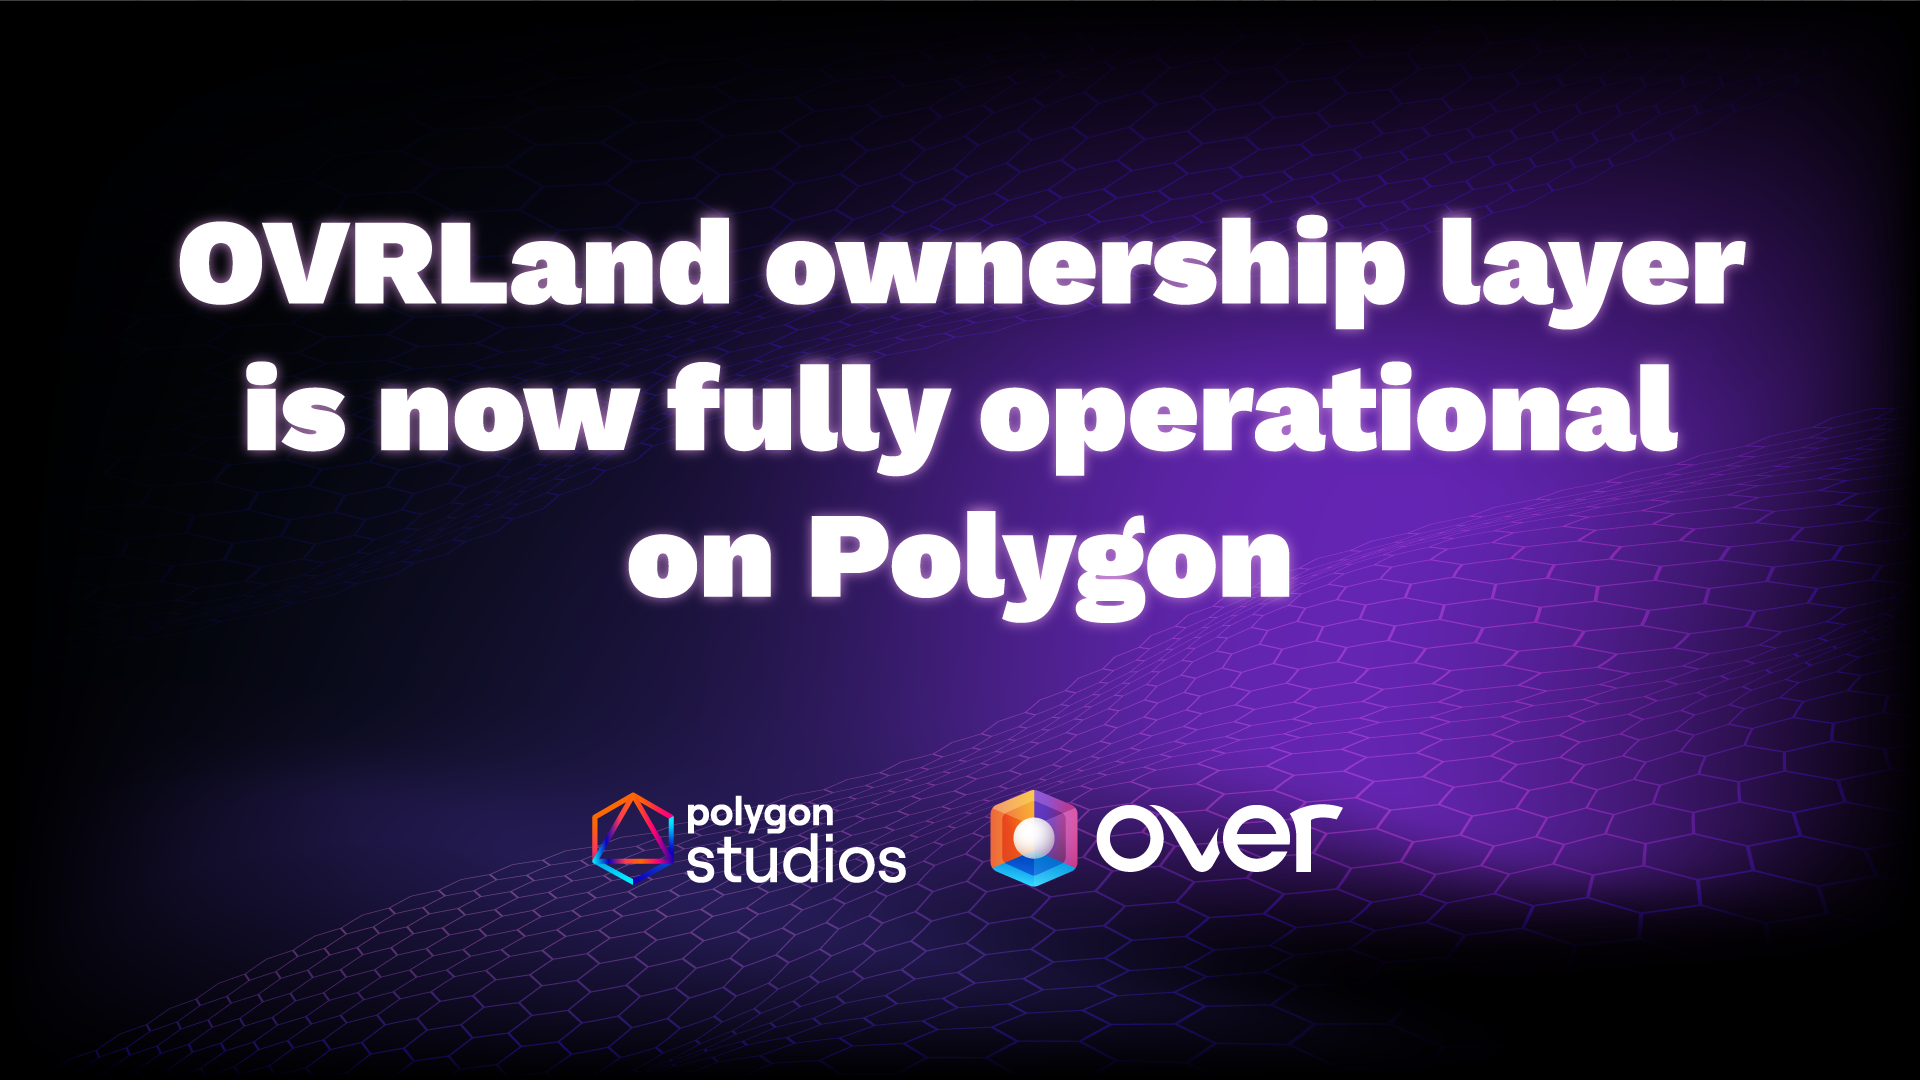 OVRLand ownership layer is now fully operational on Polygon